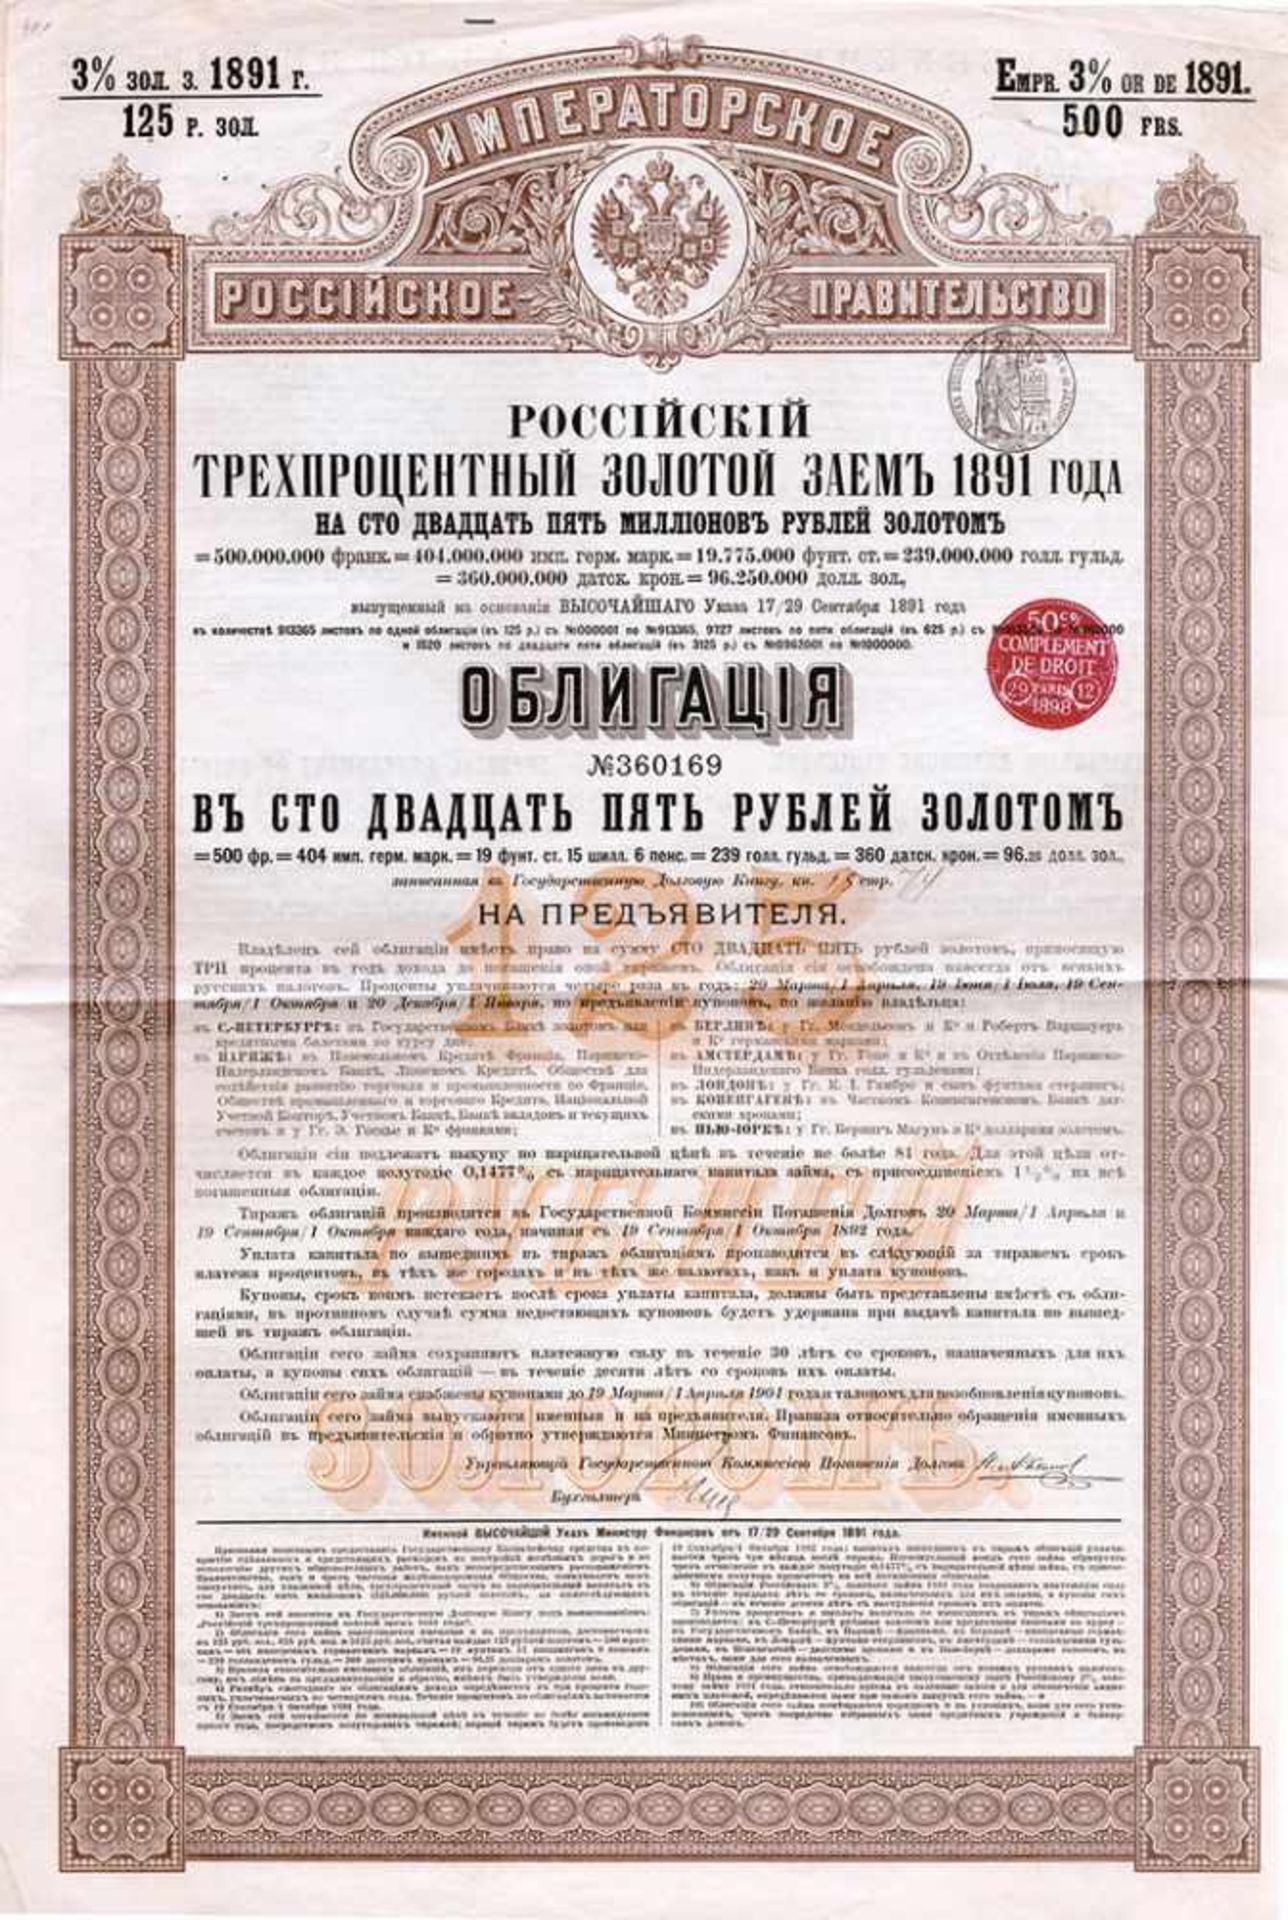 Securities of the Russian Empire of the early XX century. - Image 5 of 6